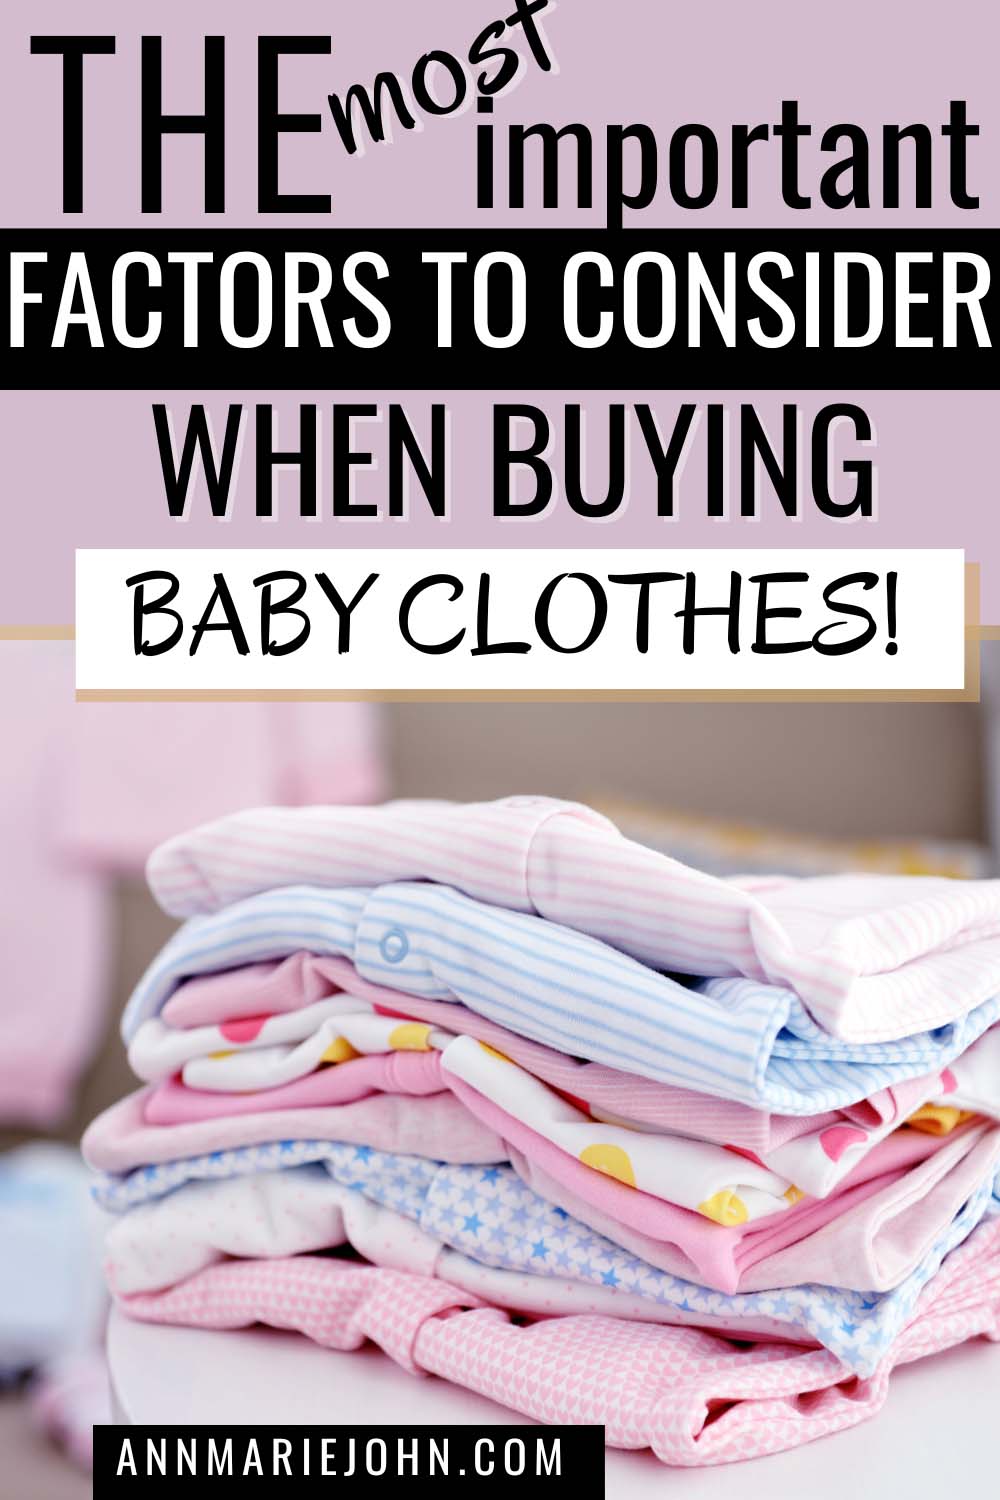 Factors to Consider When Buying Baby Clothes